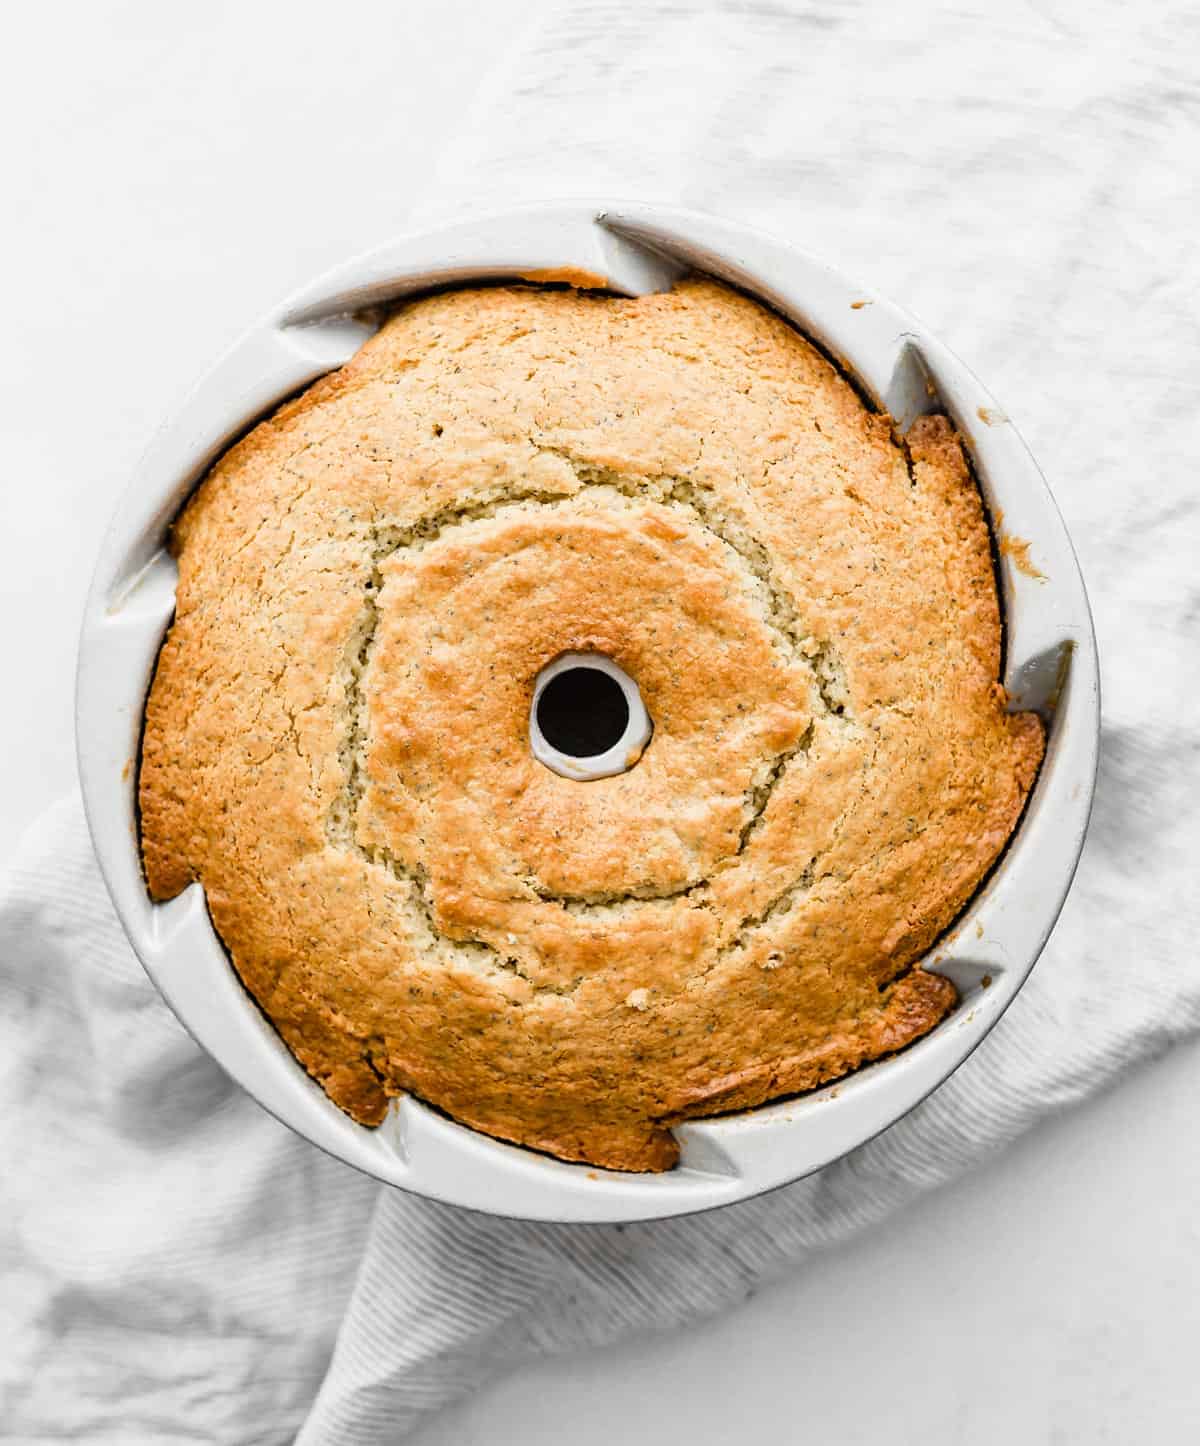 A baked Lemon Poppy Seed cake in a bundt pan on a white background.